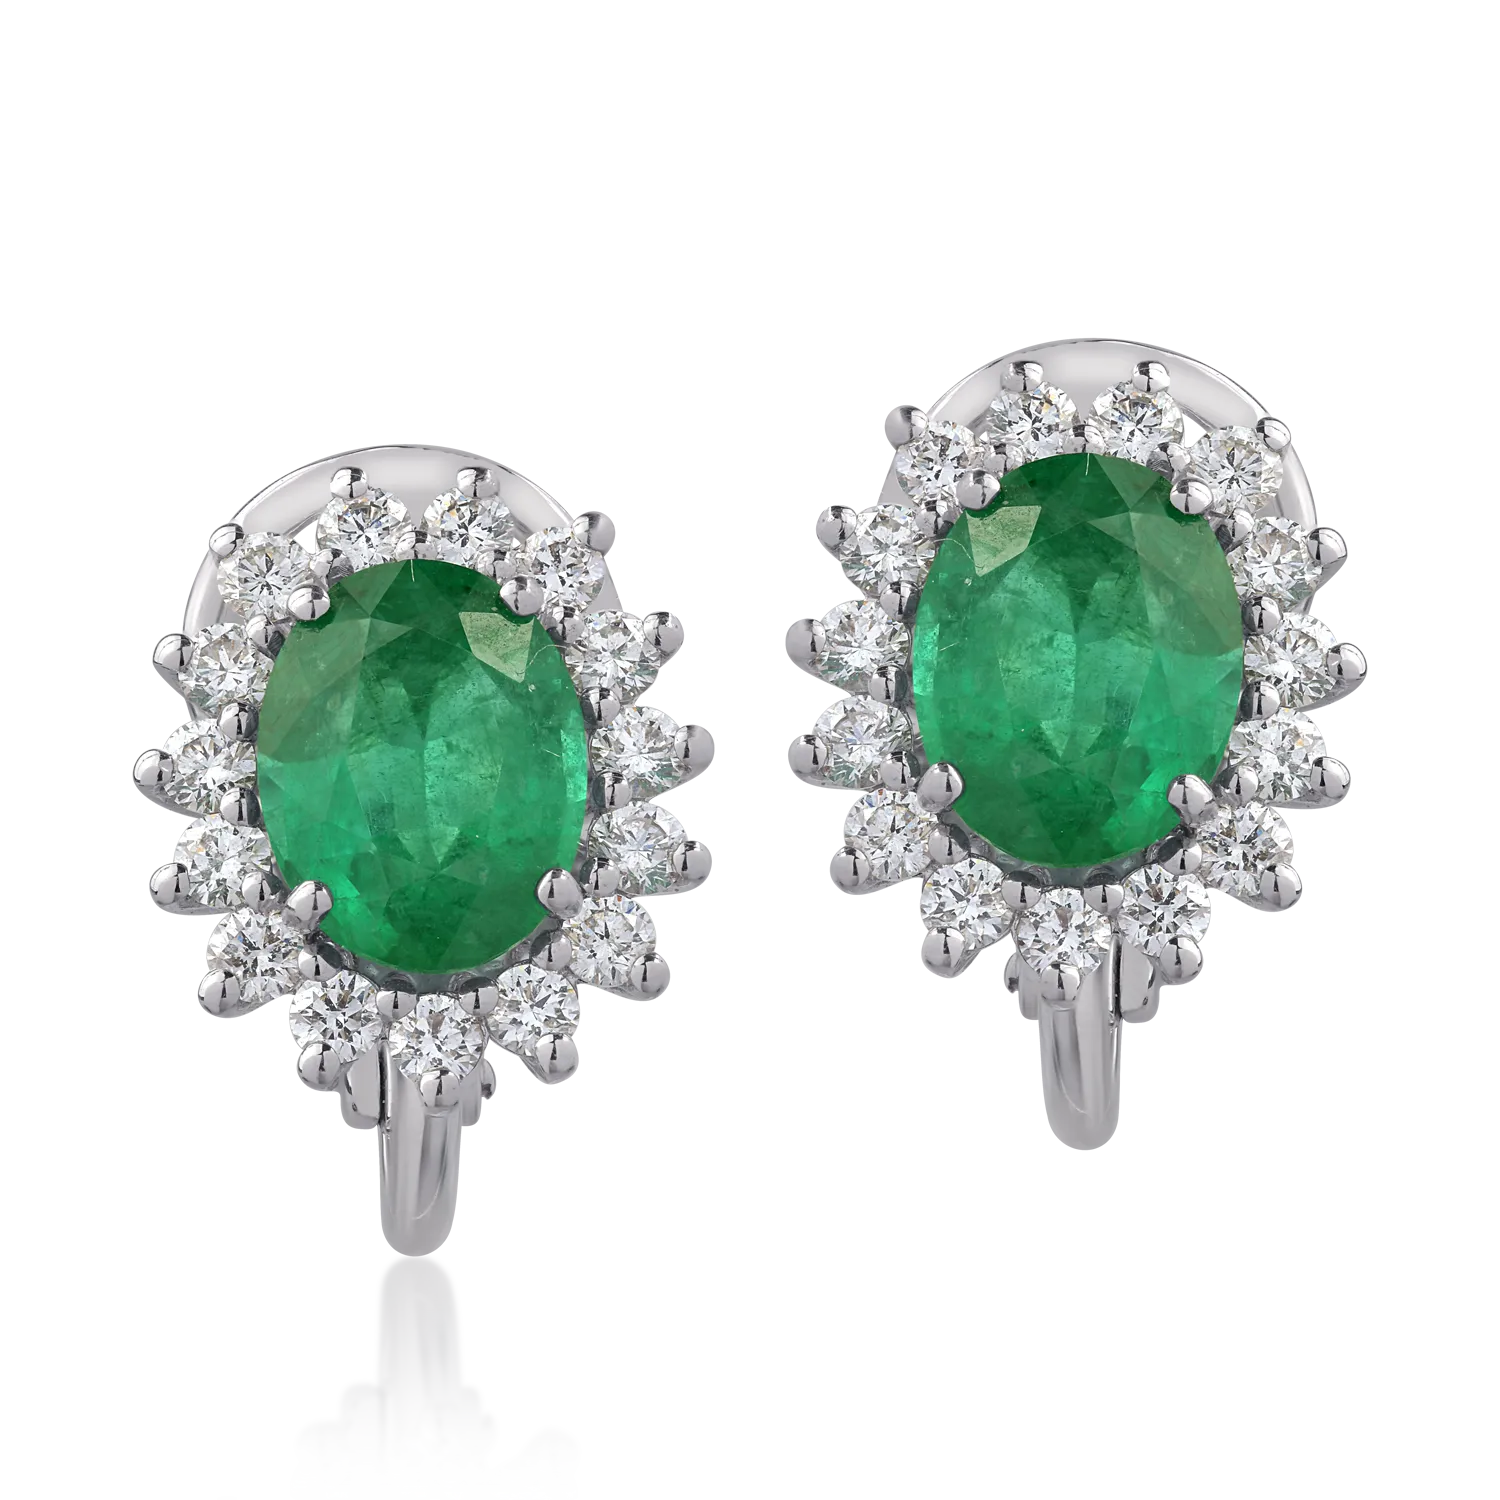 18K white gold earrings with 2.39ct emeralds and 0.64ct diamonds